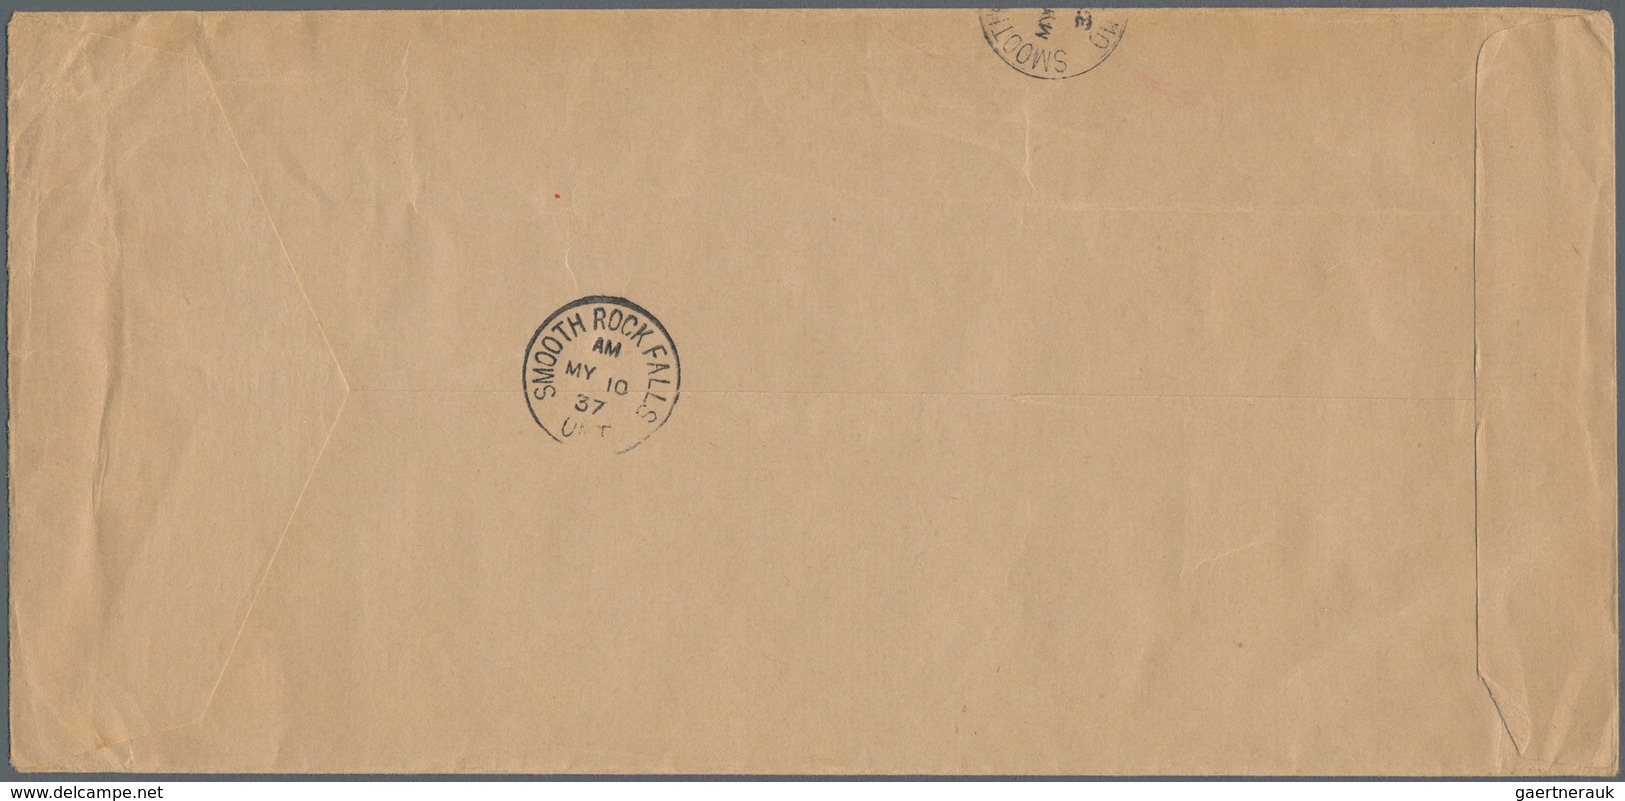 05046 Brunei: 1937 (19.3.), Huts And Canoe 8c. Grey-black Single Use On 'ON GOVERNMENT SERVICE' (Post Offi - Brunei (1984-...)